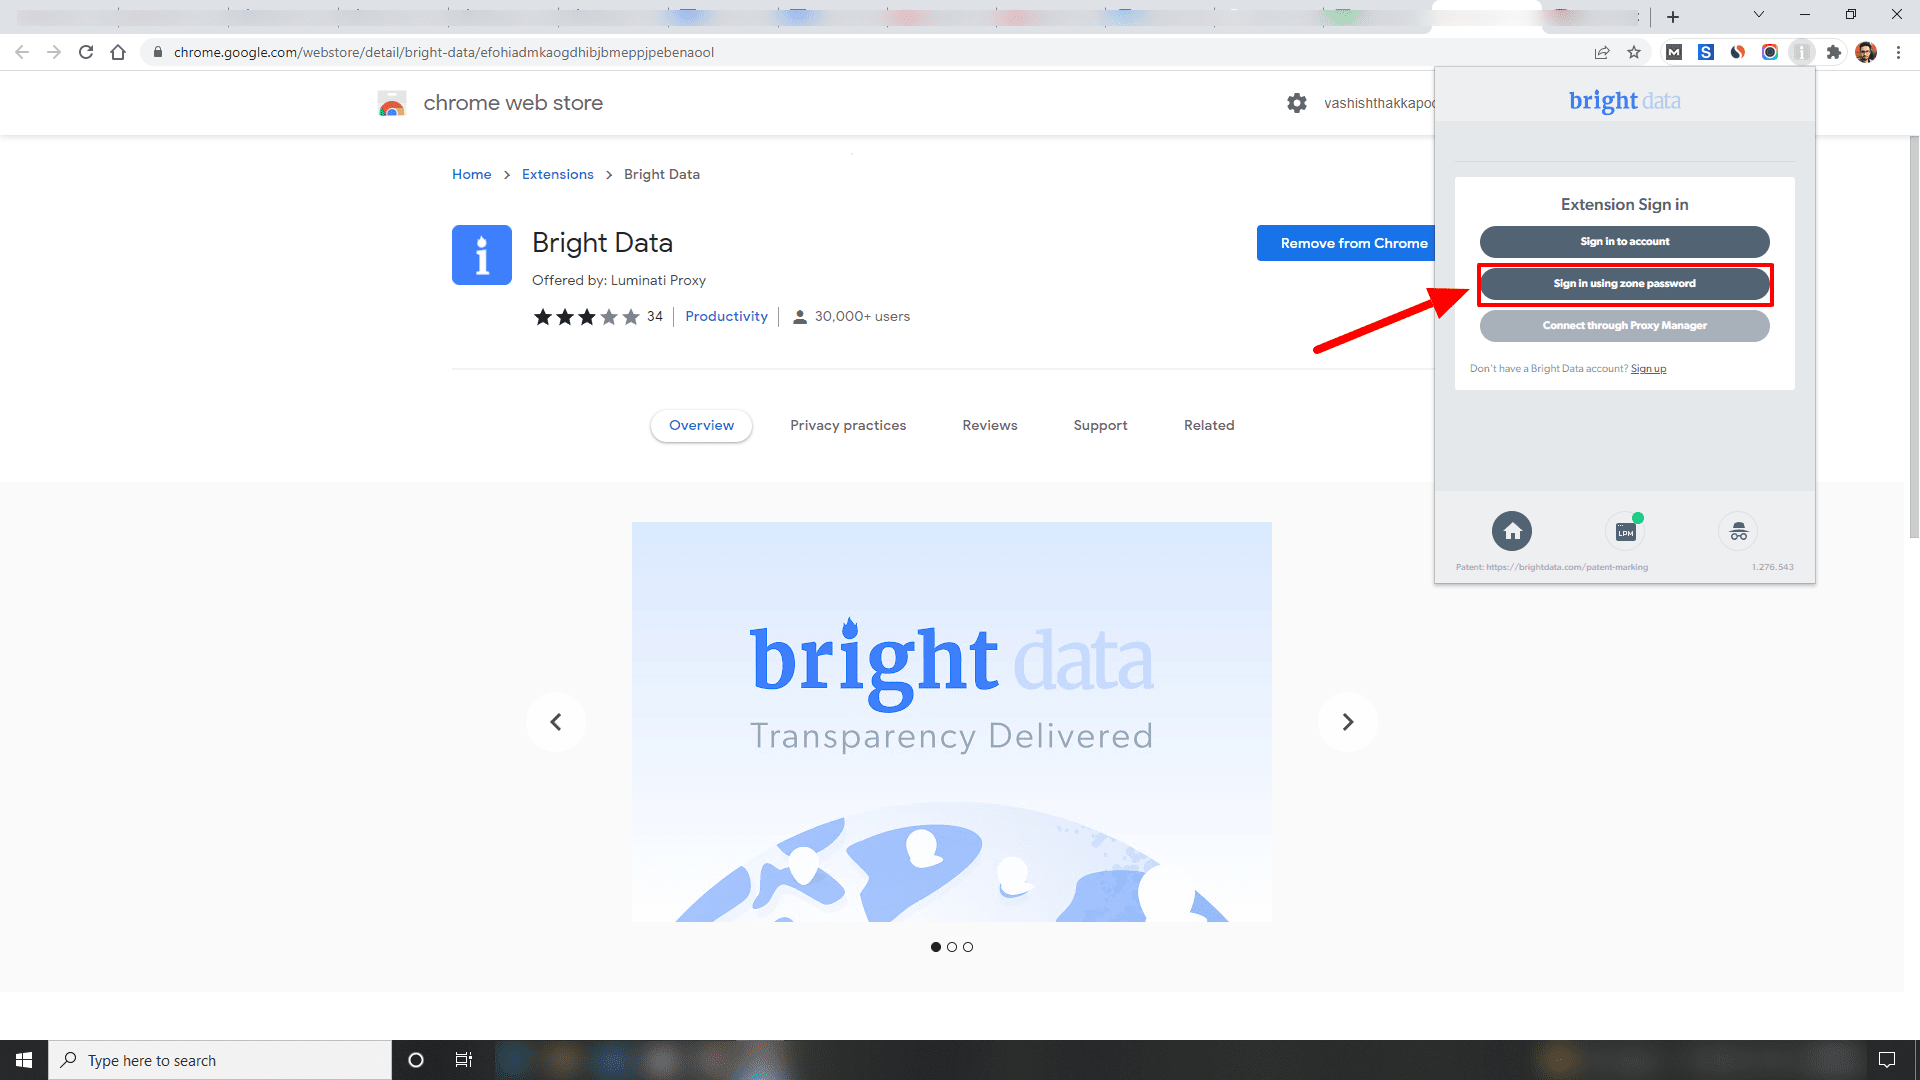 sign-in-using-zone-password-in-bright-data-chrome-extension